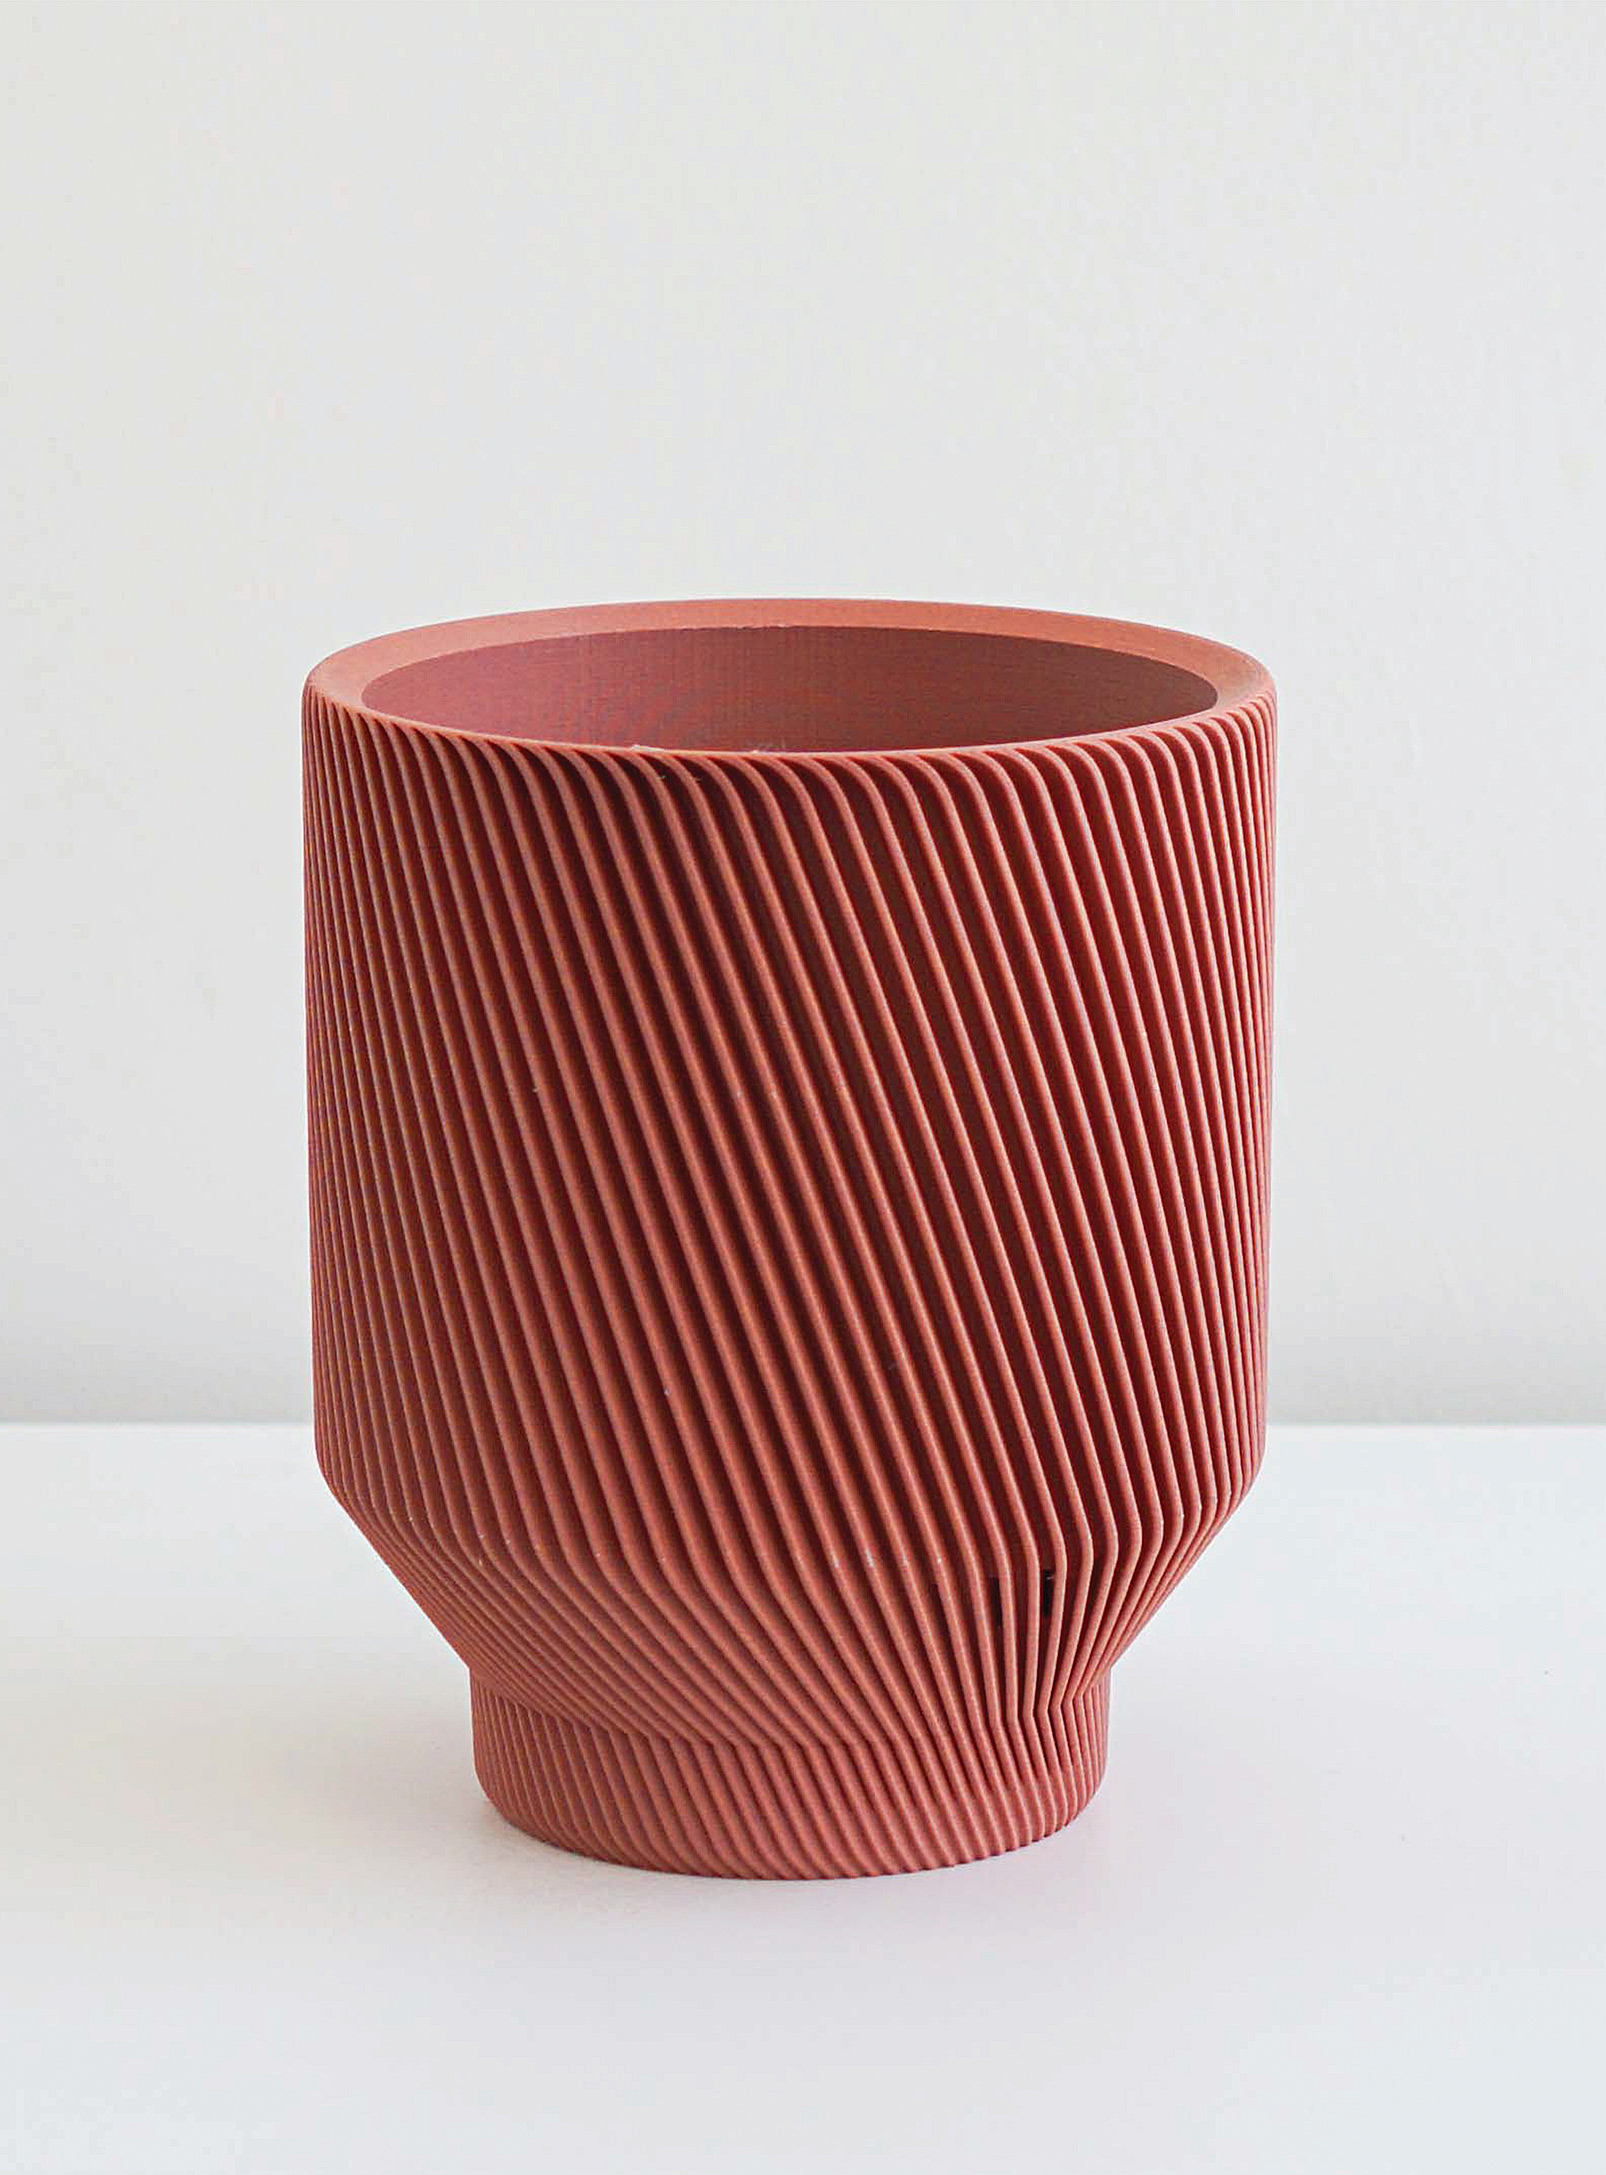 Conifer Homewares Spruce Plant-based Planter See Available Sizes In Dusky Pink